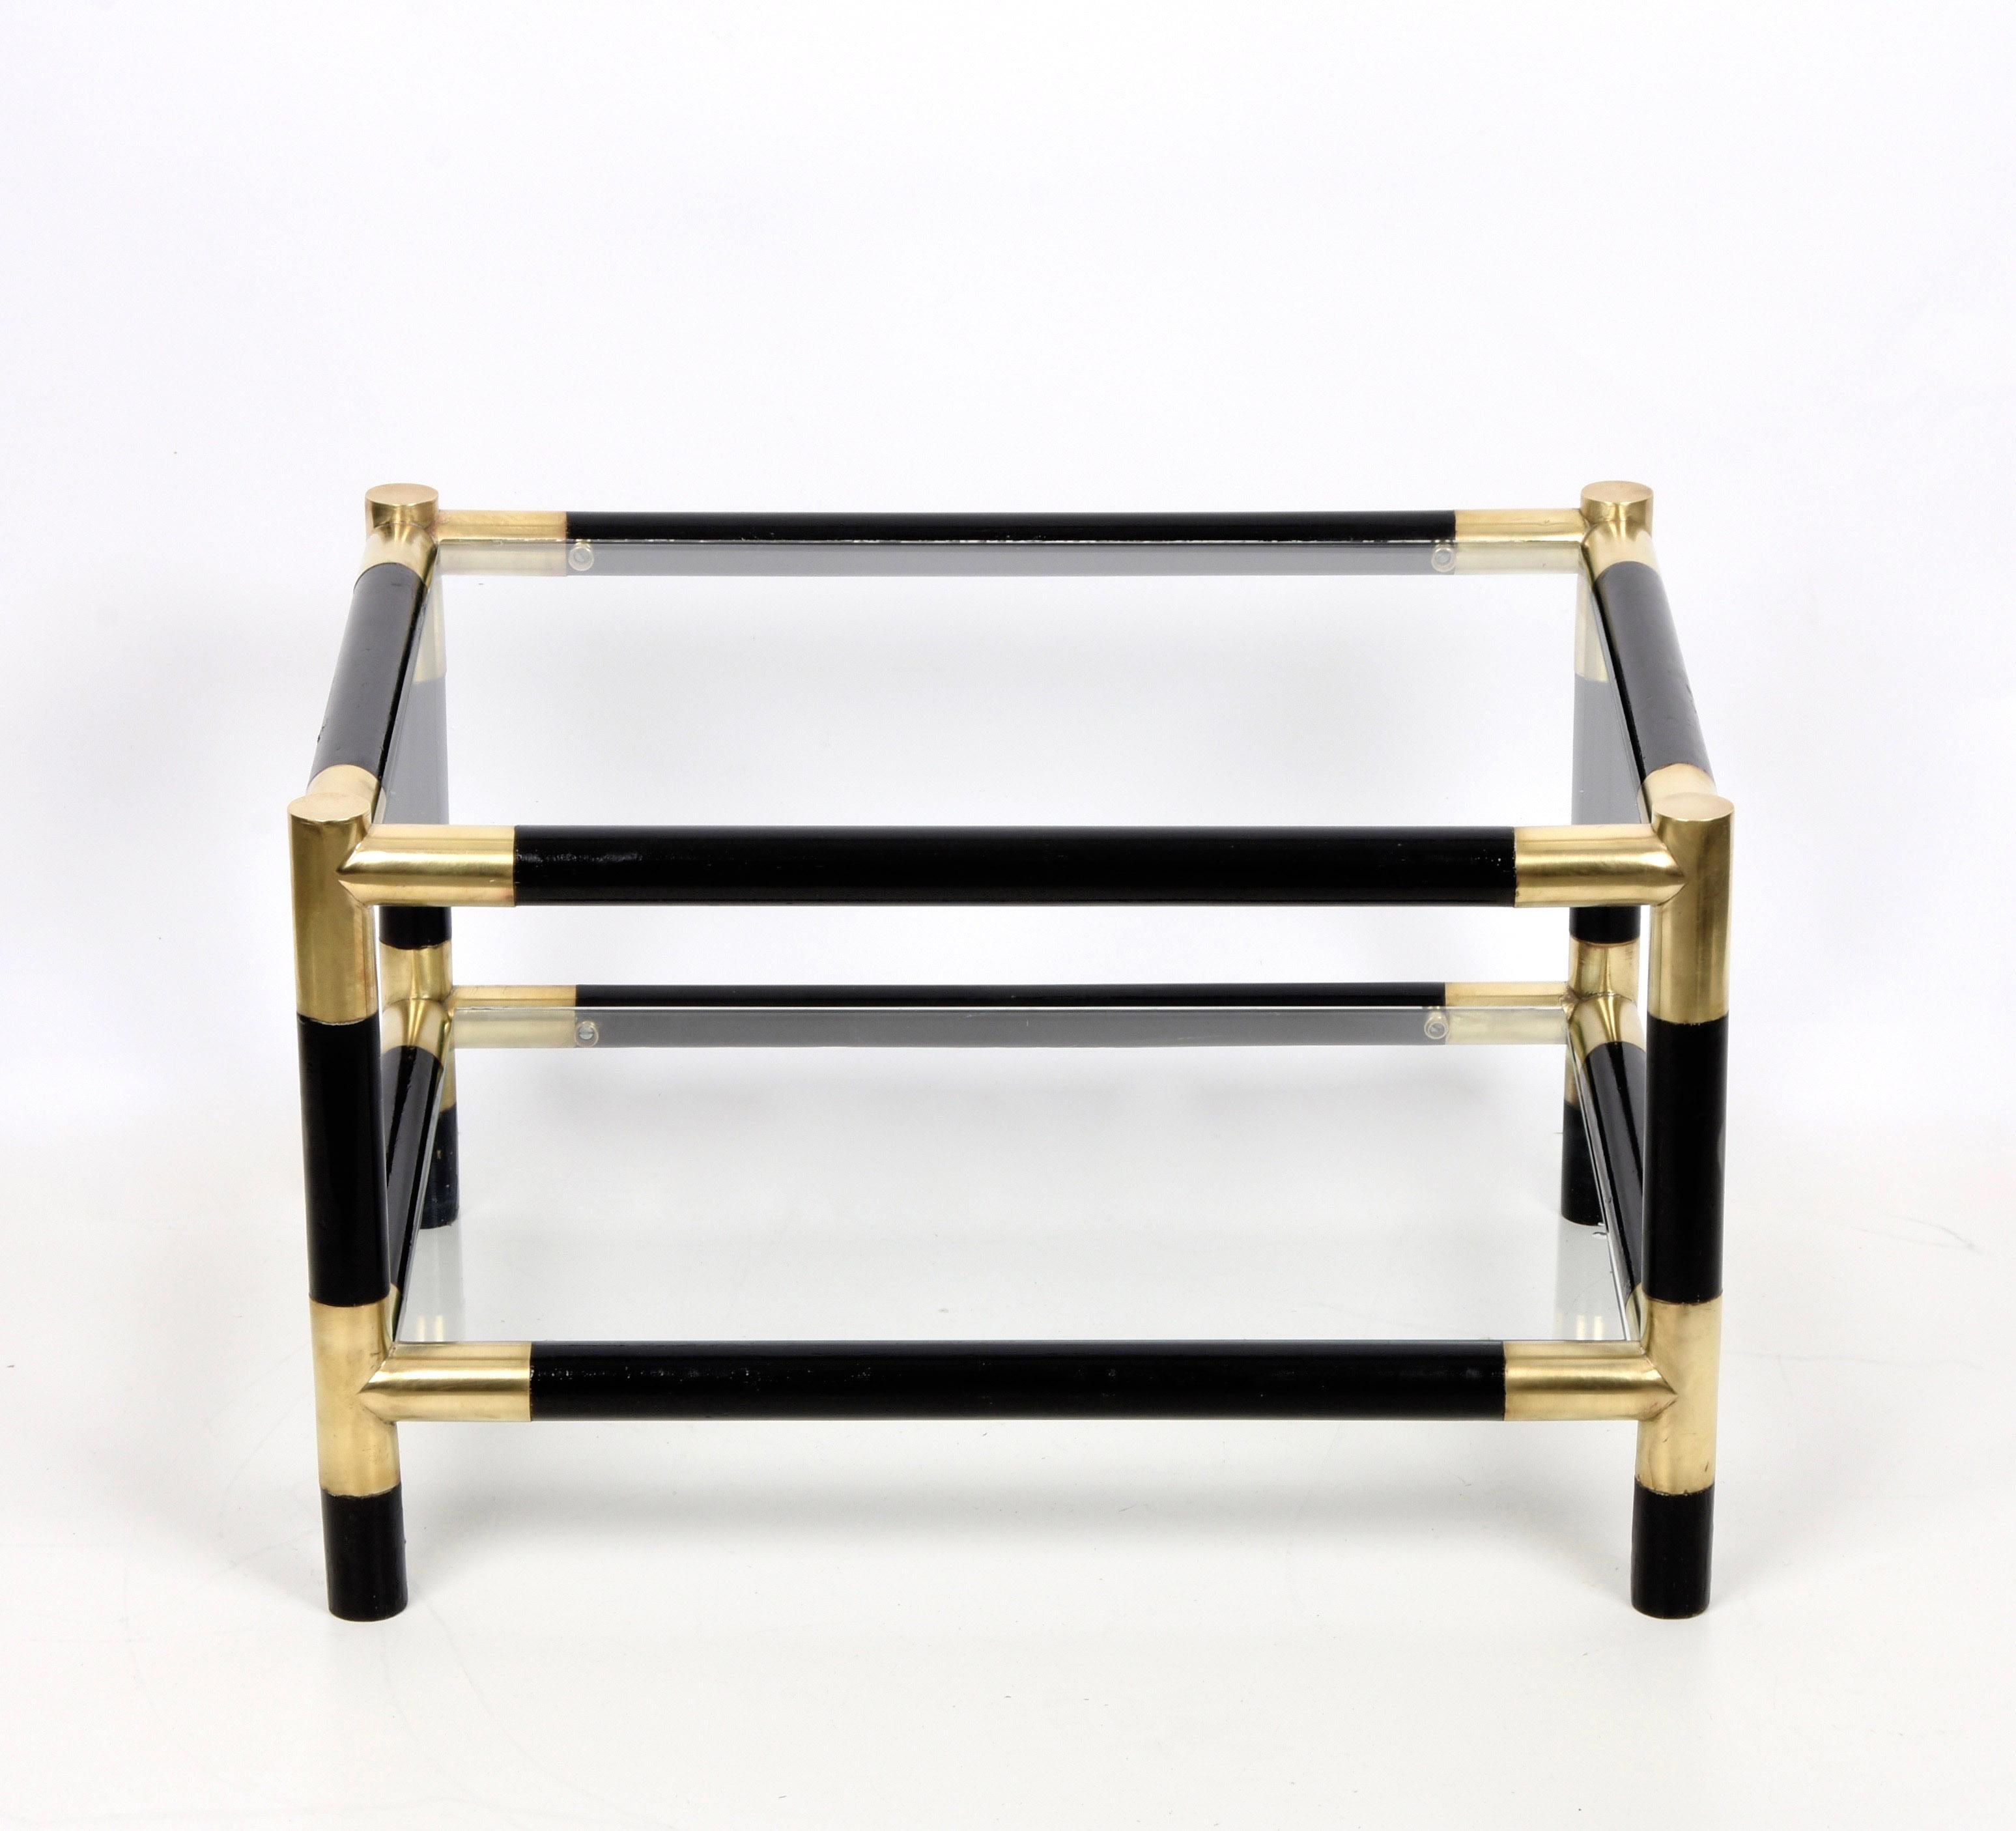 Amazing midcentury side table in lacquered black wood with half-century brass and two crystal shelves. This fantastic side table was produced in Italy during the 1970s. 

This side table conveys elegant and delicate feelings. This piece is solid,